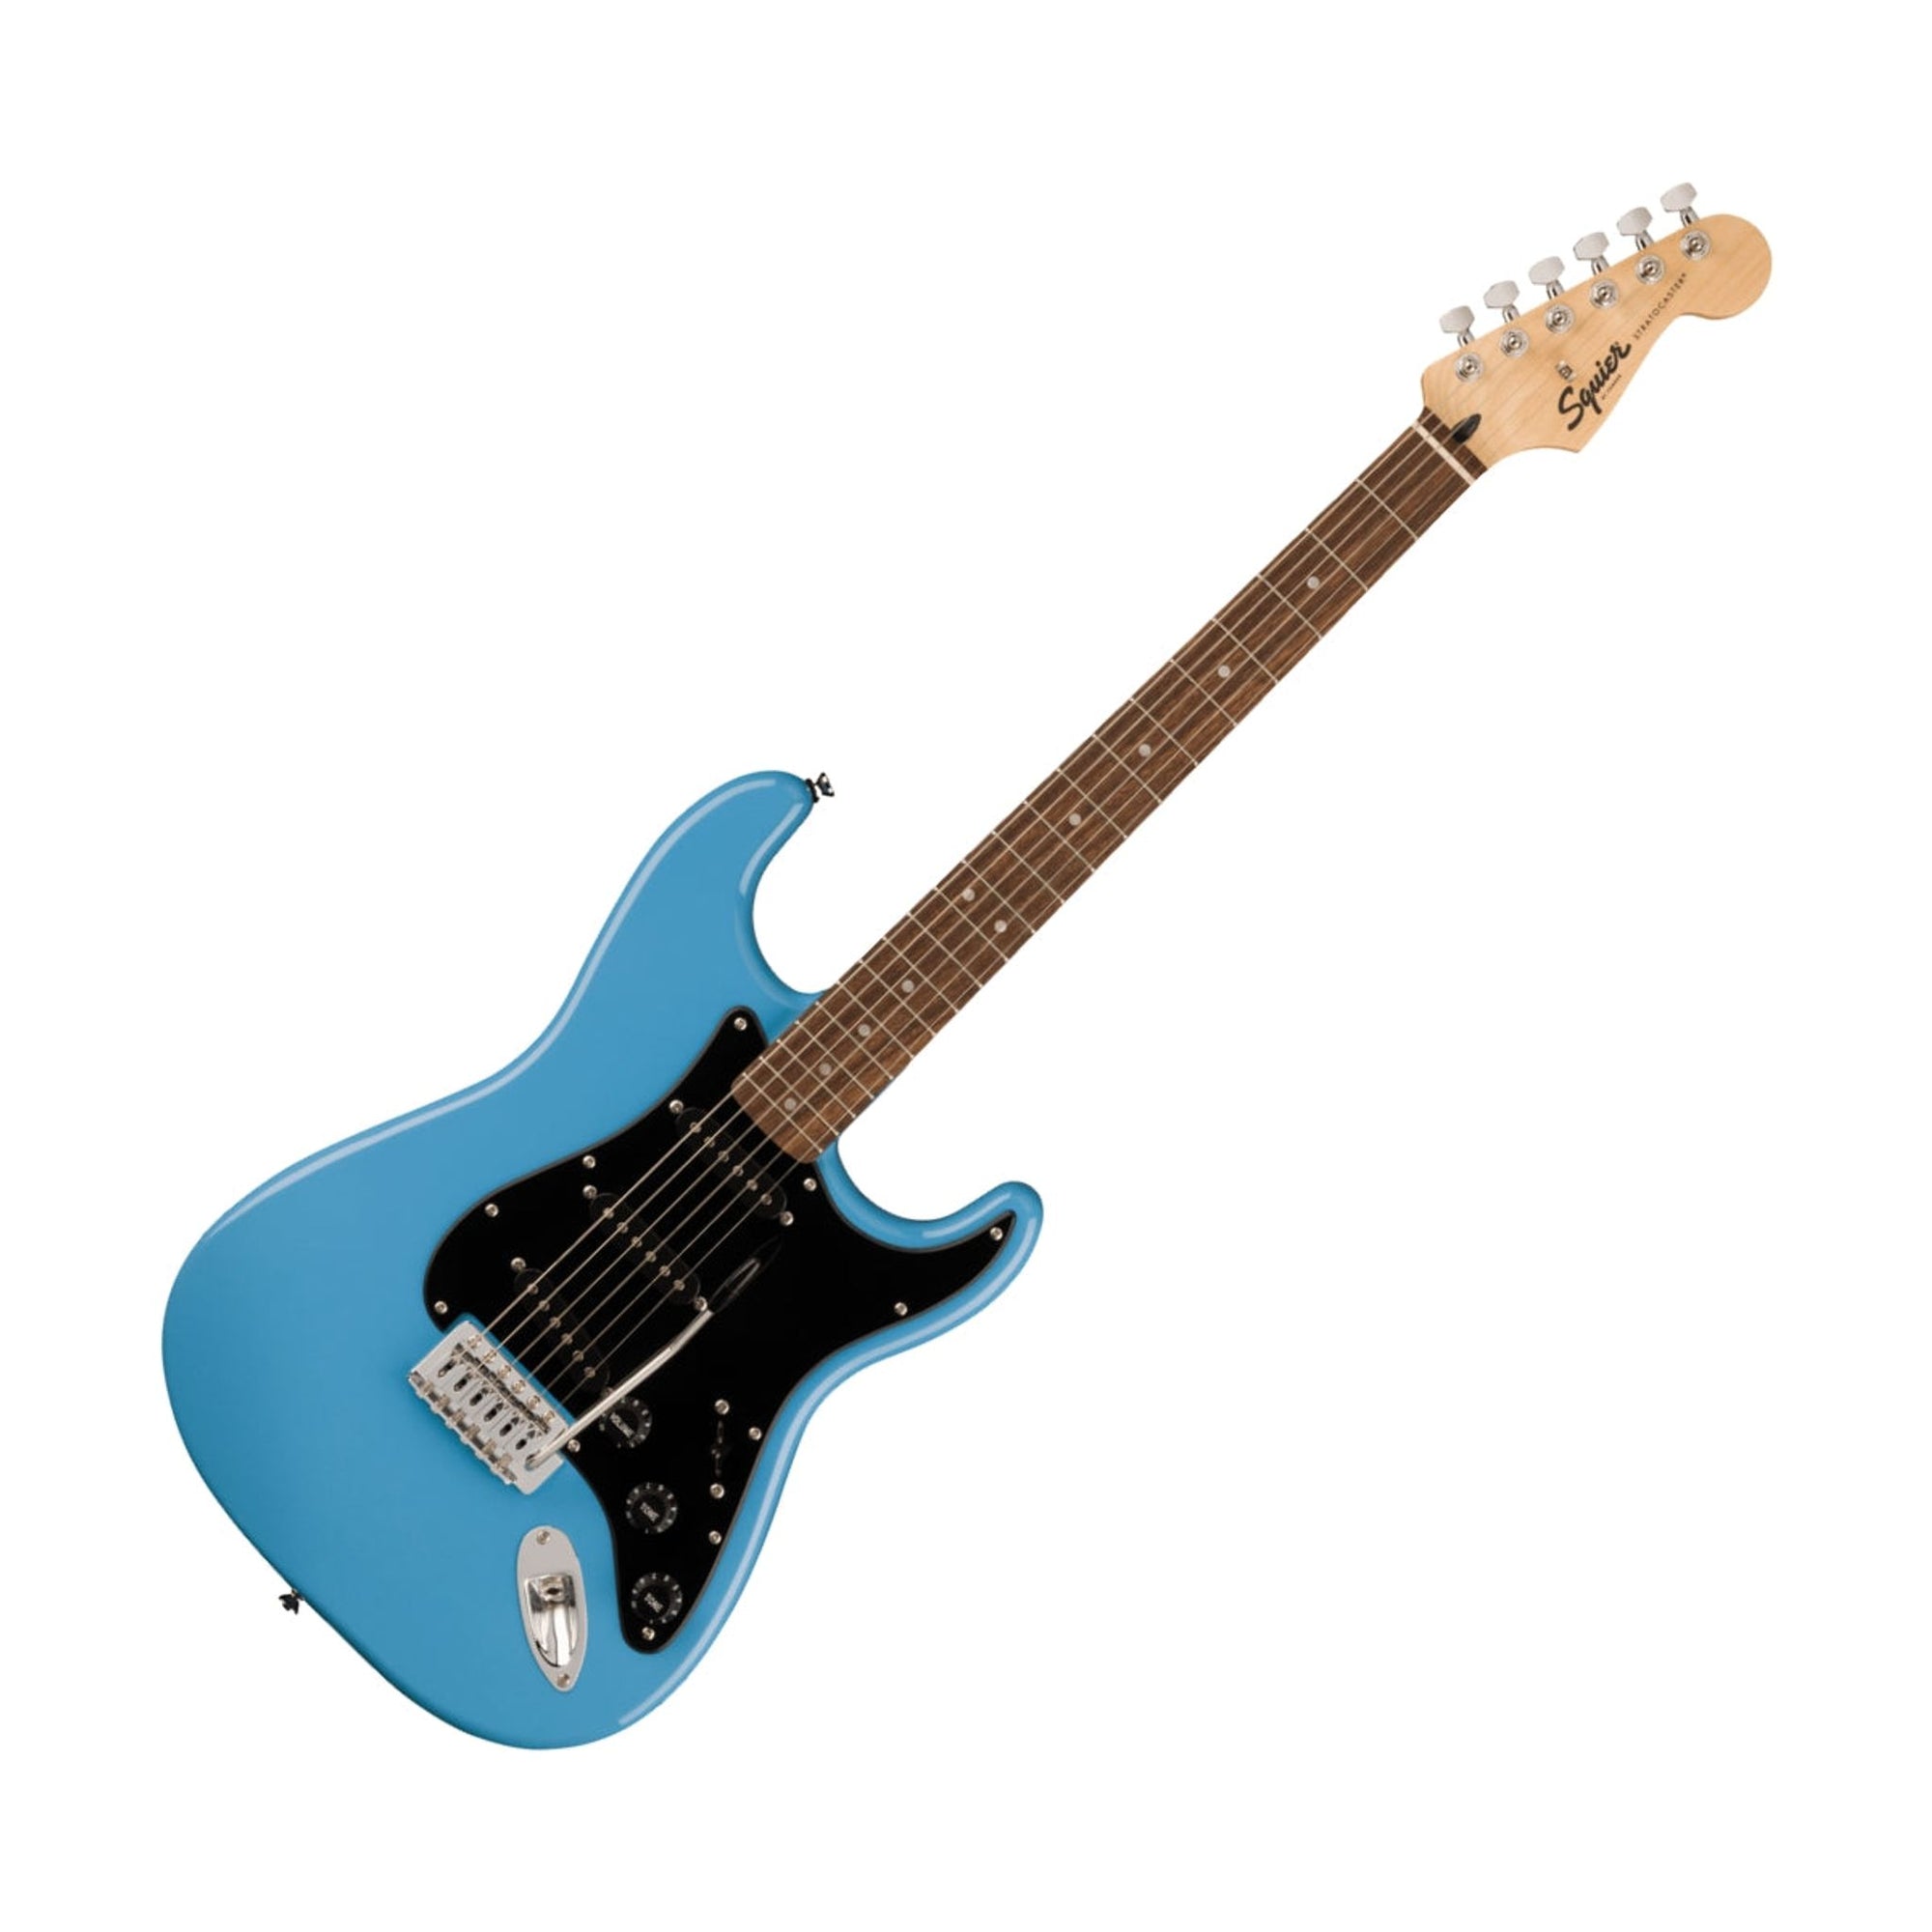 The Fender Squier Sonic Stratocaster Electric Guitar is ready to launch any musical adventure into warp speed, offering iconic Fender style and inspiring tone for players at any stage.